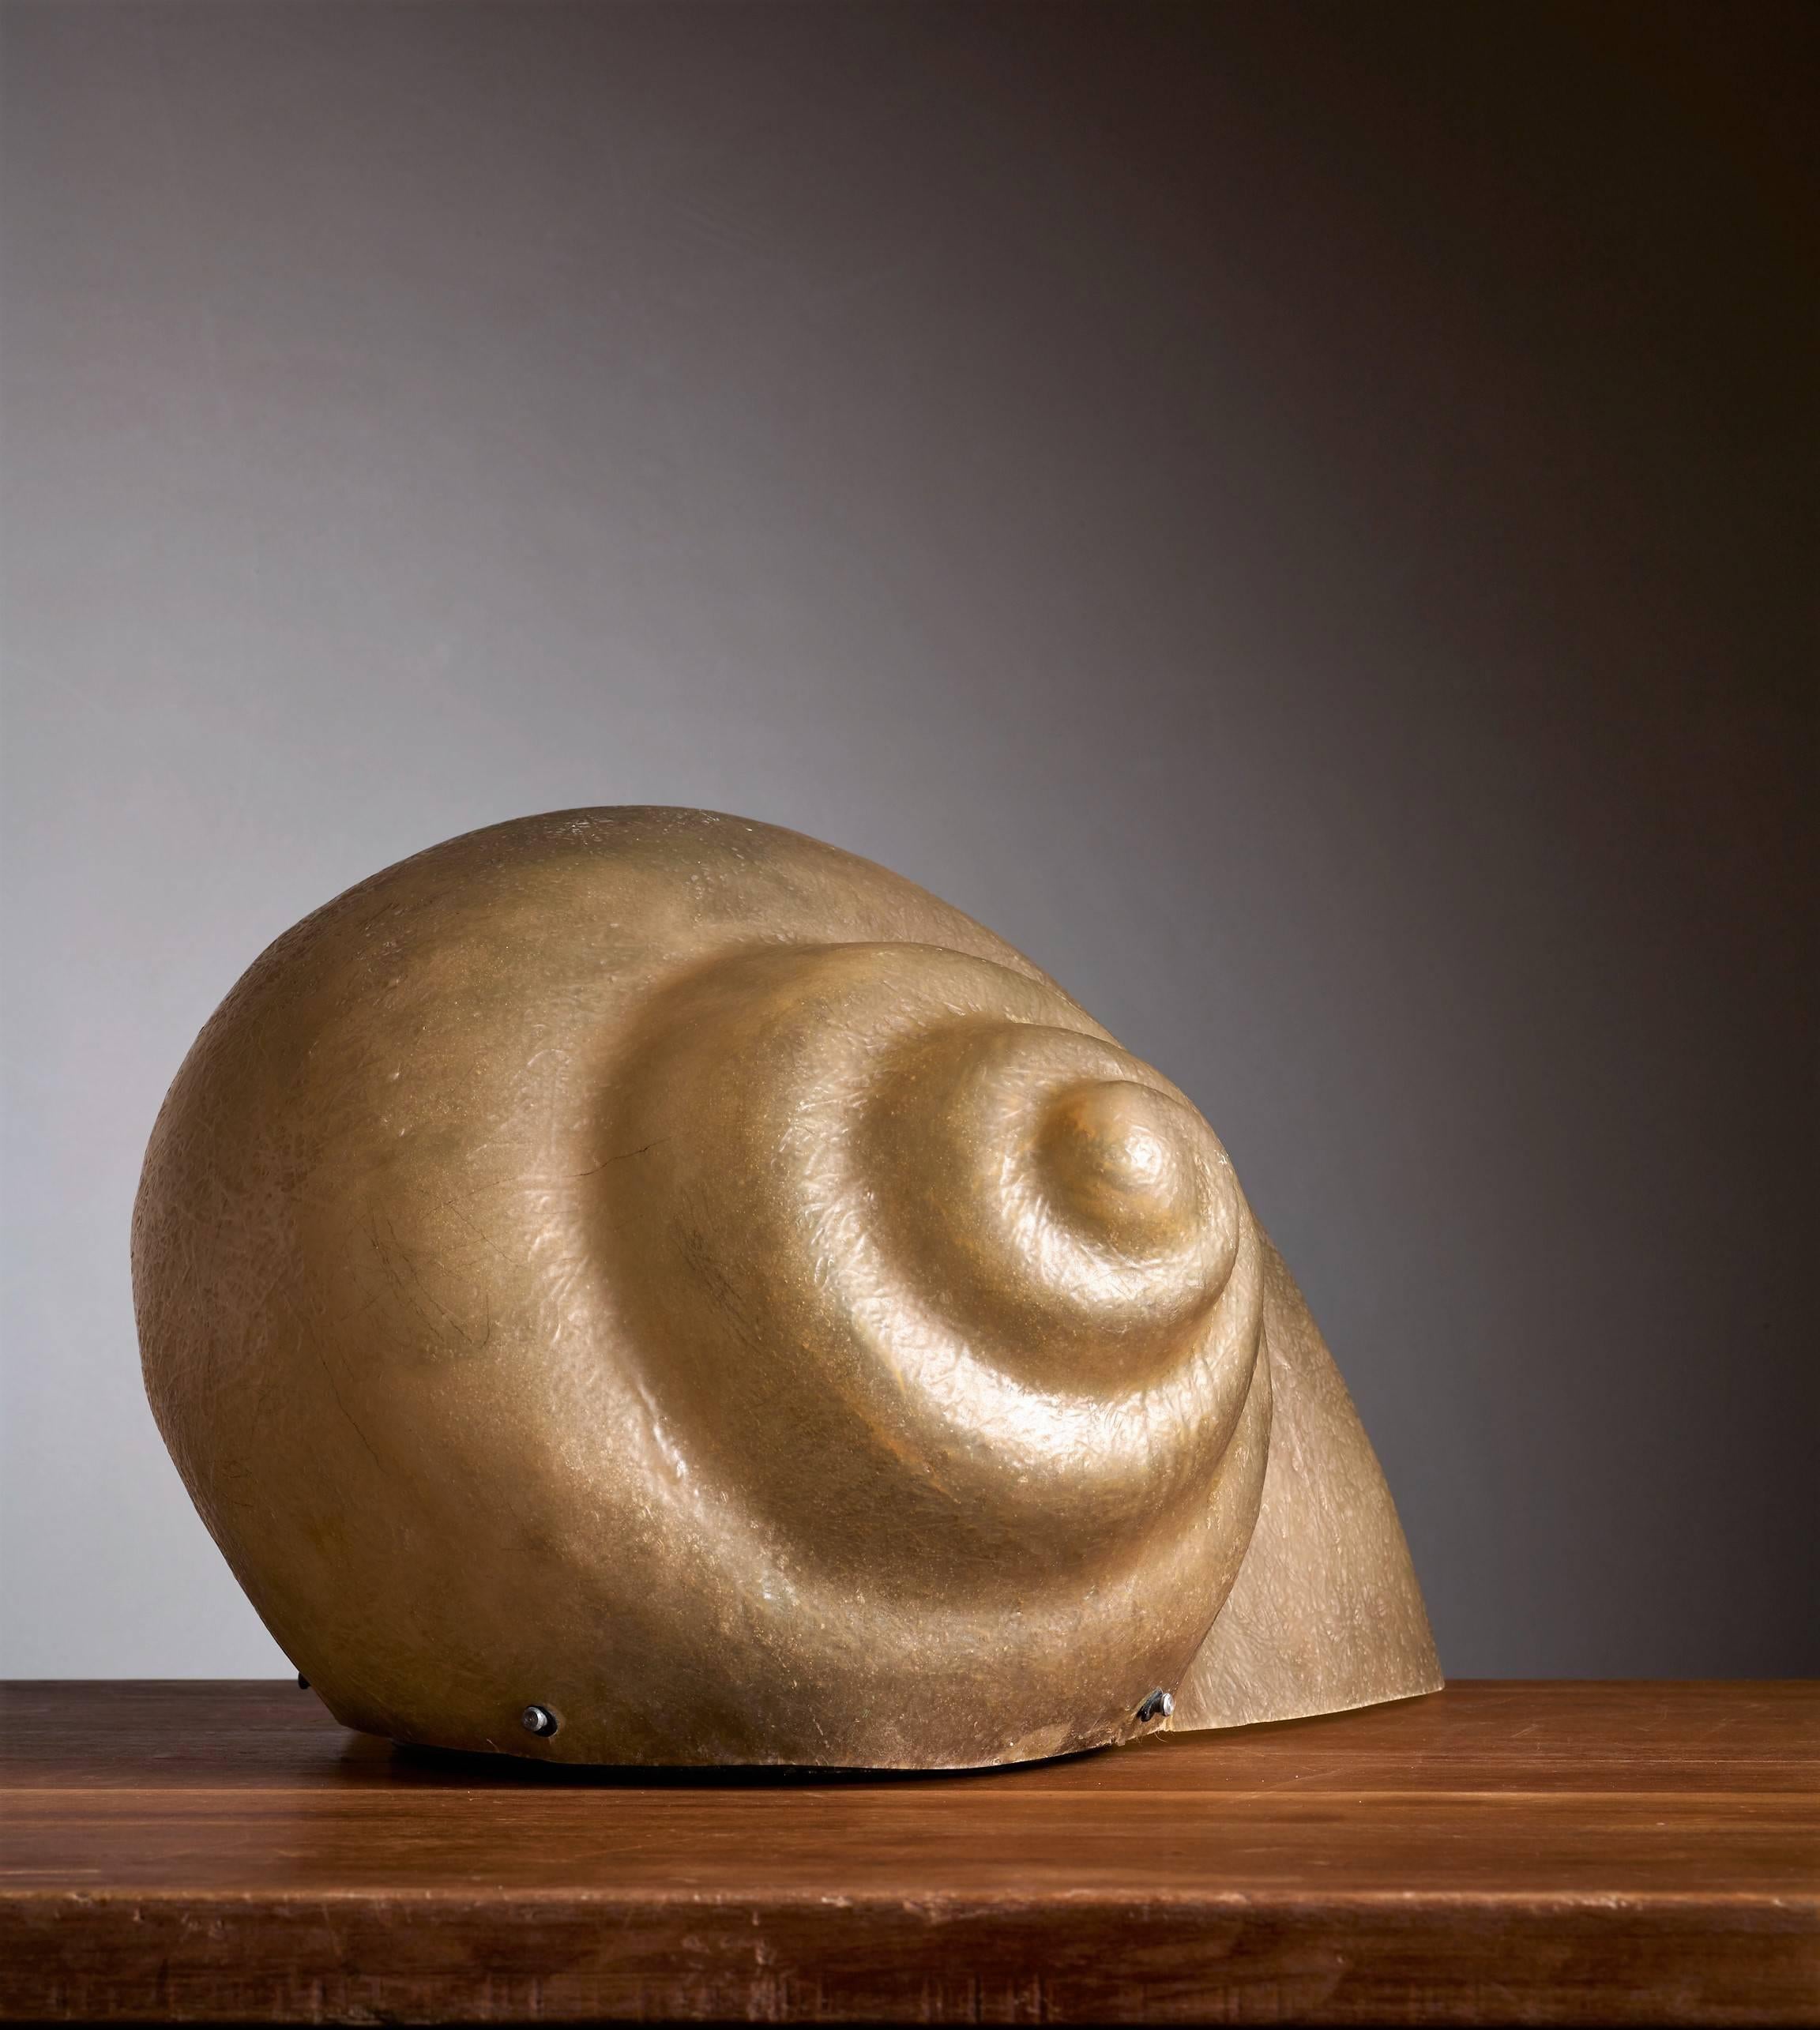 A floor or table lamp by Sergio Camilli for Bieffeplast, Italy, 1974. This lamp in the shape of a snail is made of a semi-transparent fiberglass.
